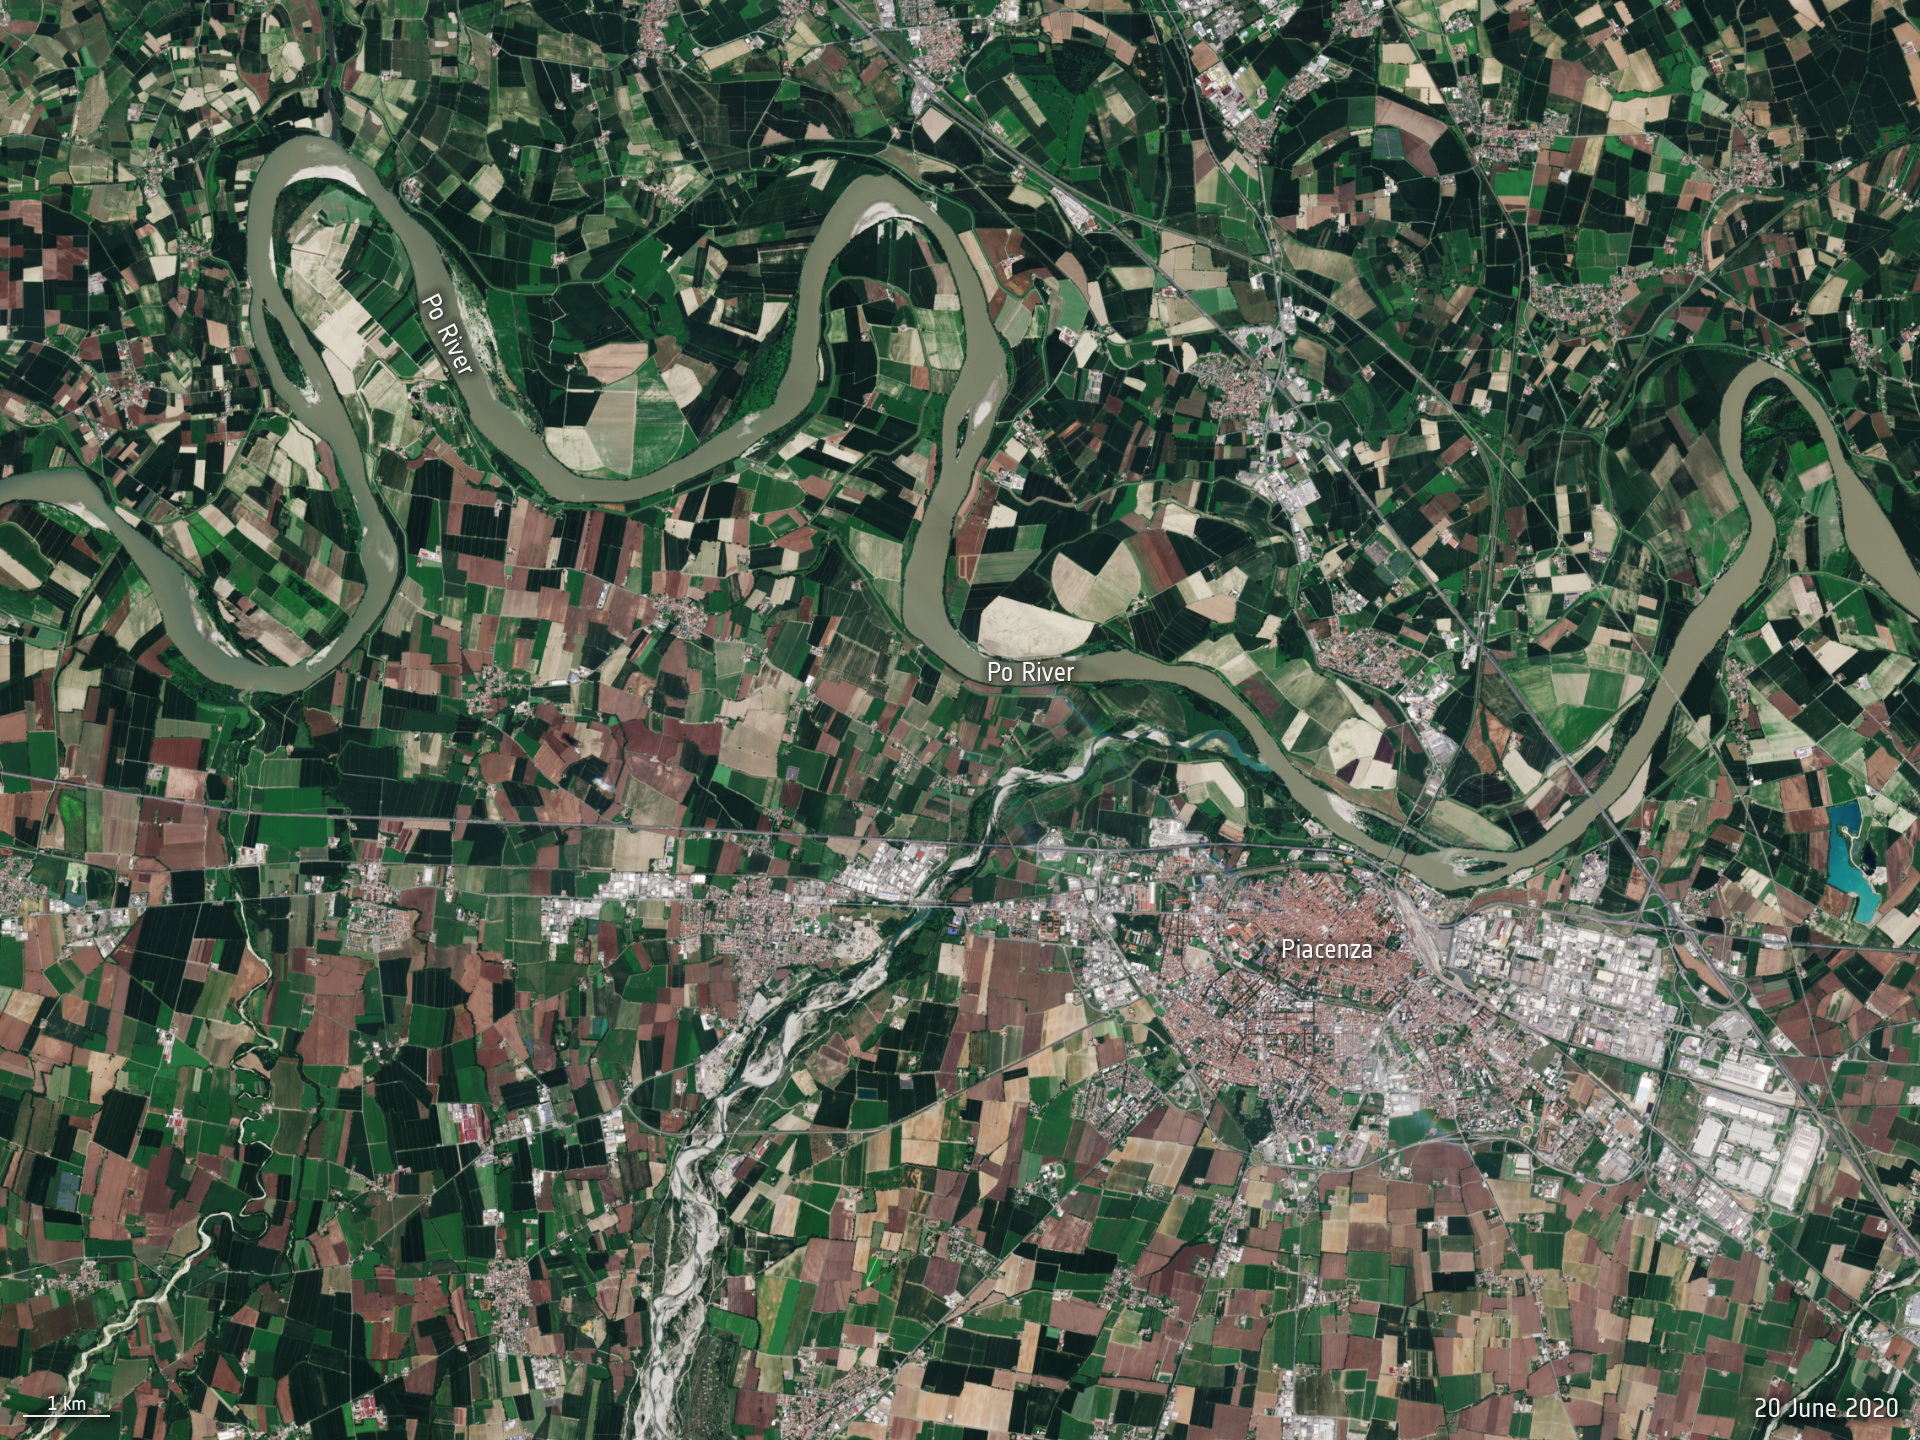 A Copernicus Sentinel-2 satellite image shows Po River water levels in northern Italy